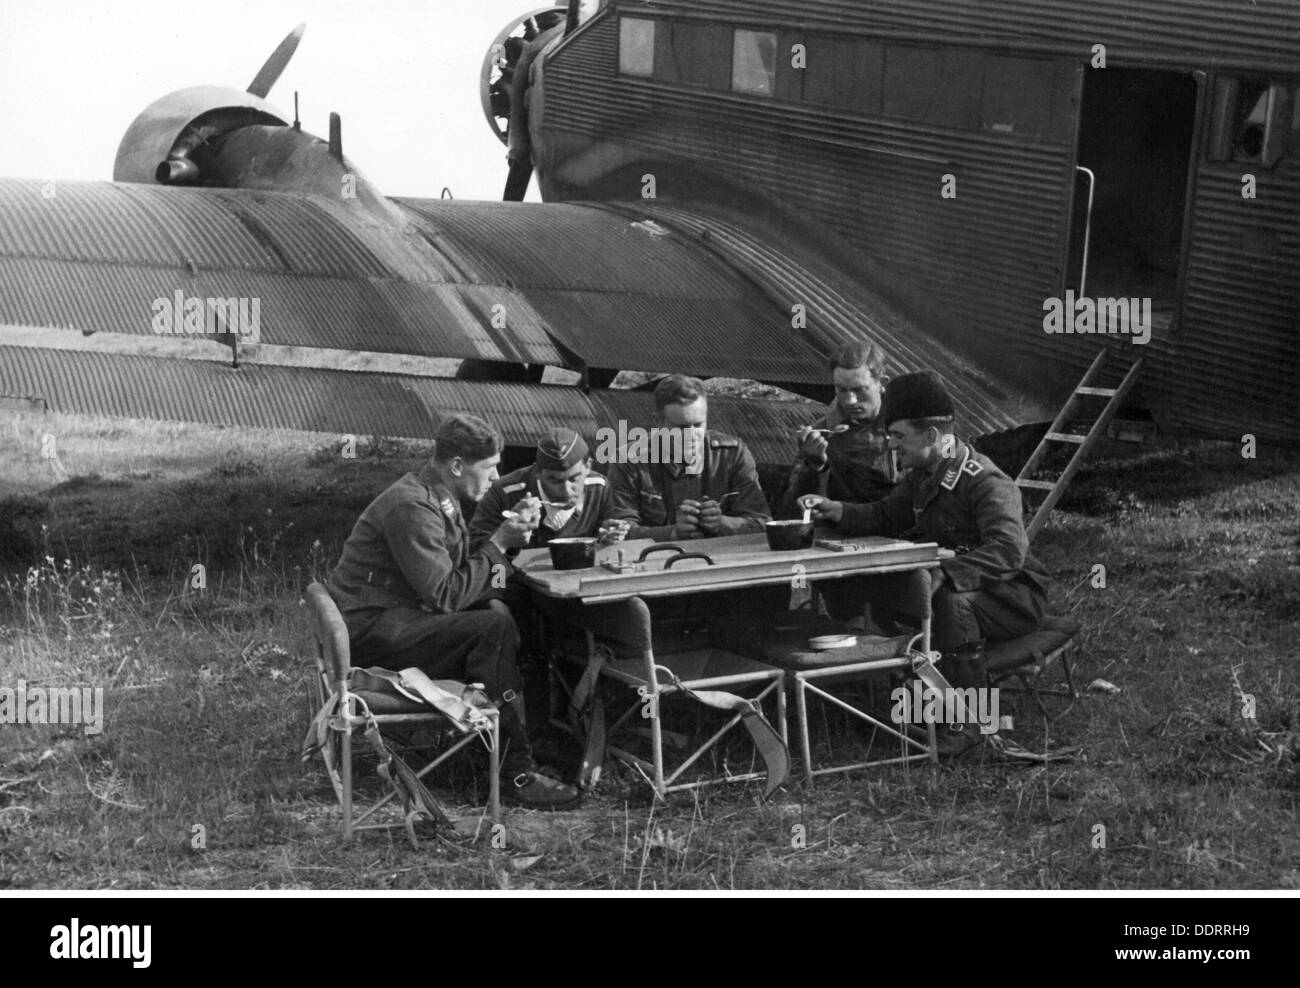 Second World War / WWII,Greece,German war correspondents of 3rd Air Force War Correspondent Company,during dinner besides an transport aircraft Junkers Ju 52,near Salonika,April 1941,journalist,journalists,propaganda company,soldiers,soldier,people,men,man,aeroplane,airplane,airplanes,aeroplanes,airfields,airfield,airstrip,strip,airstrips,strips,Luftwaffe(German Air Force),meal,meals,mess kit,seats,airline seat,the Balkans,Balkans campaign,communications zone,back area,rear echelon,Georg Schödl,German Reich,Third Reich,Mac,Additional-Rights-Clearences-Not Available Stock Photo